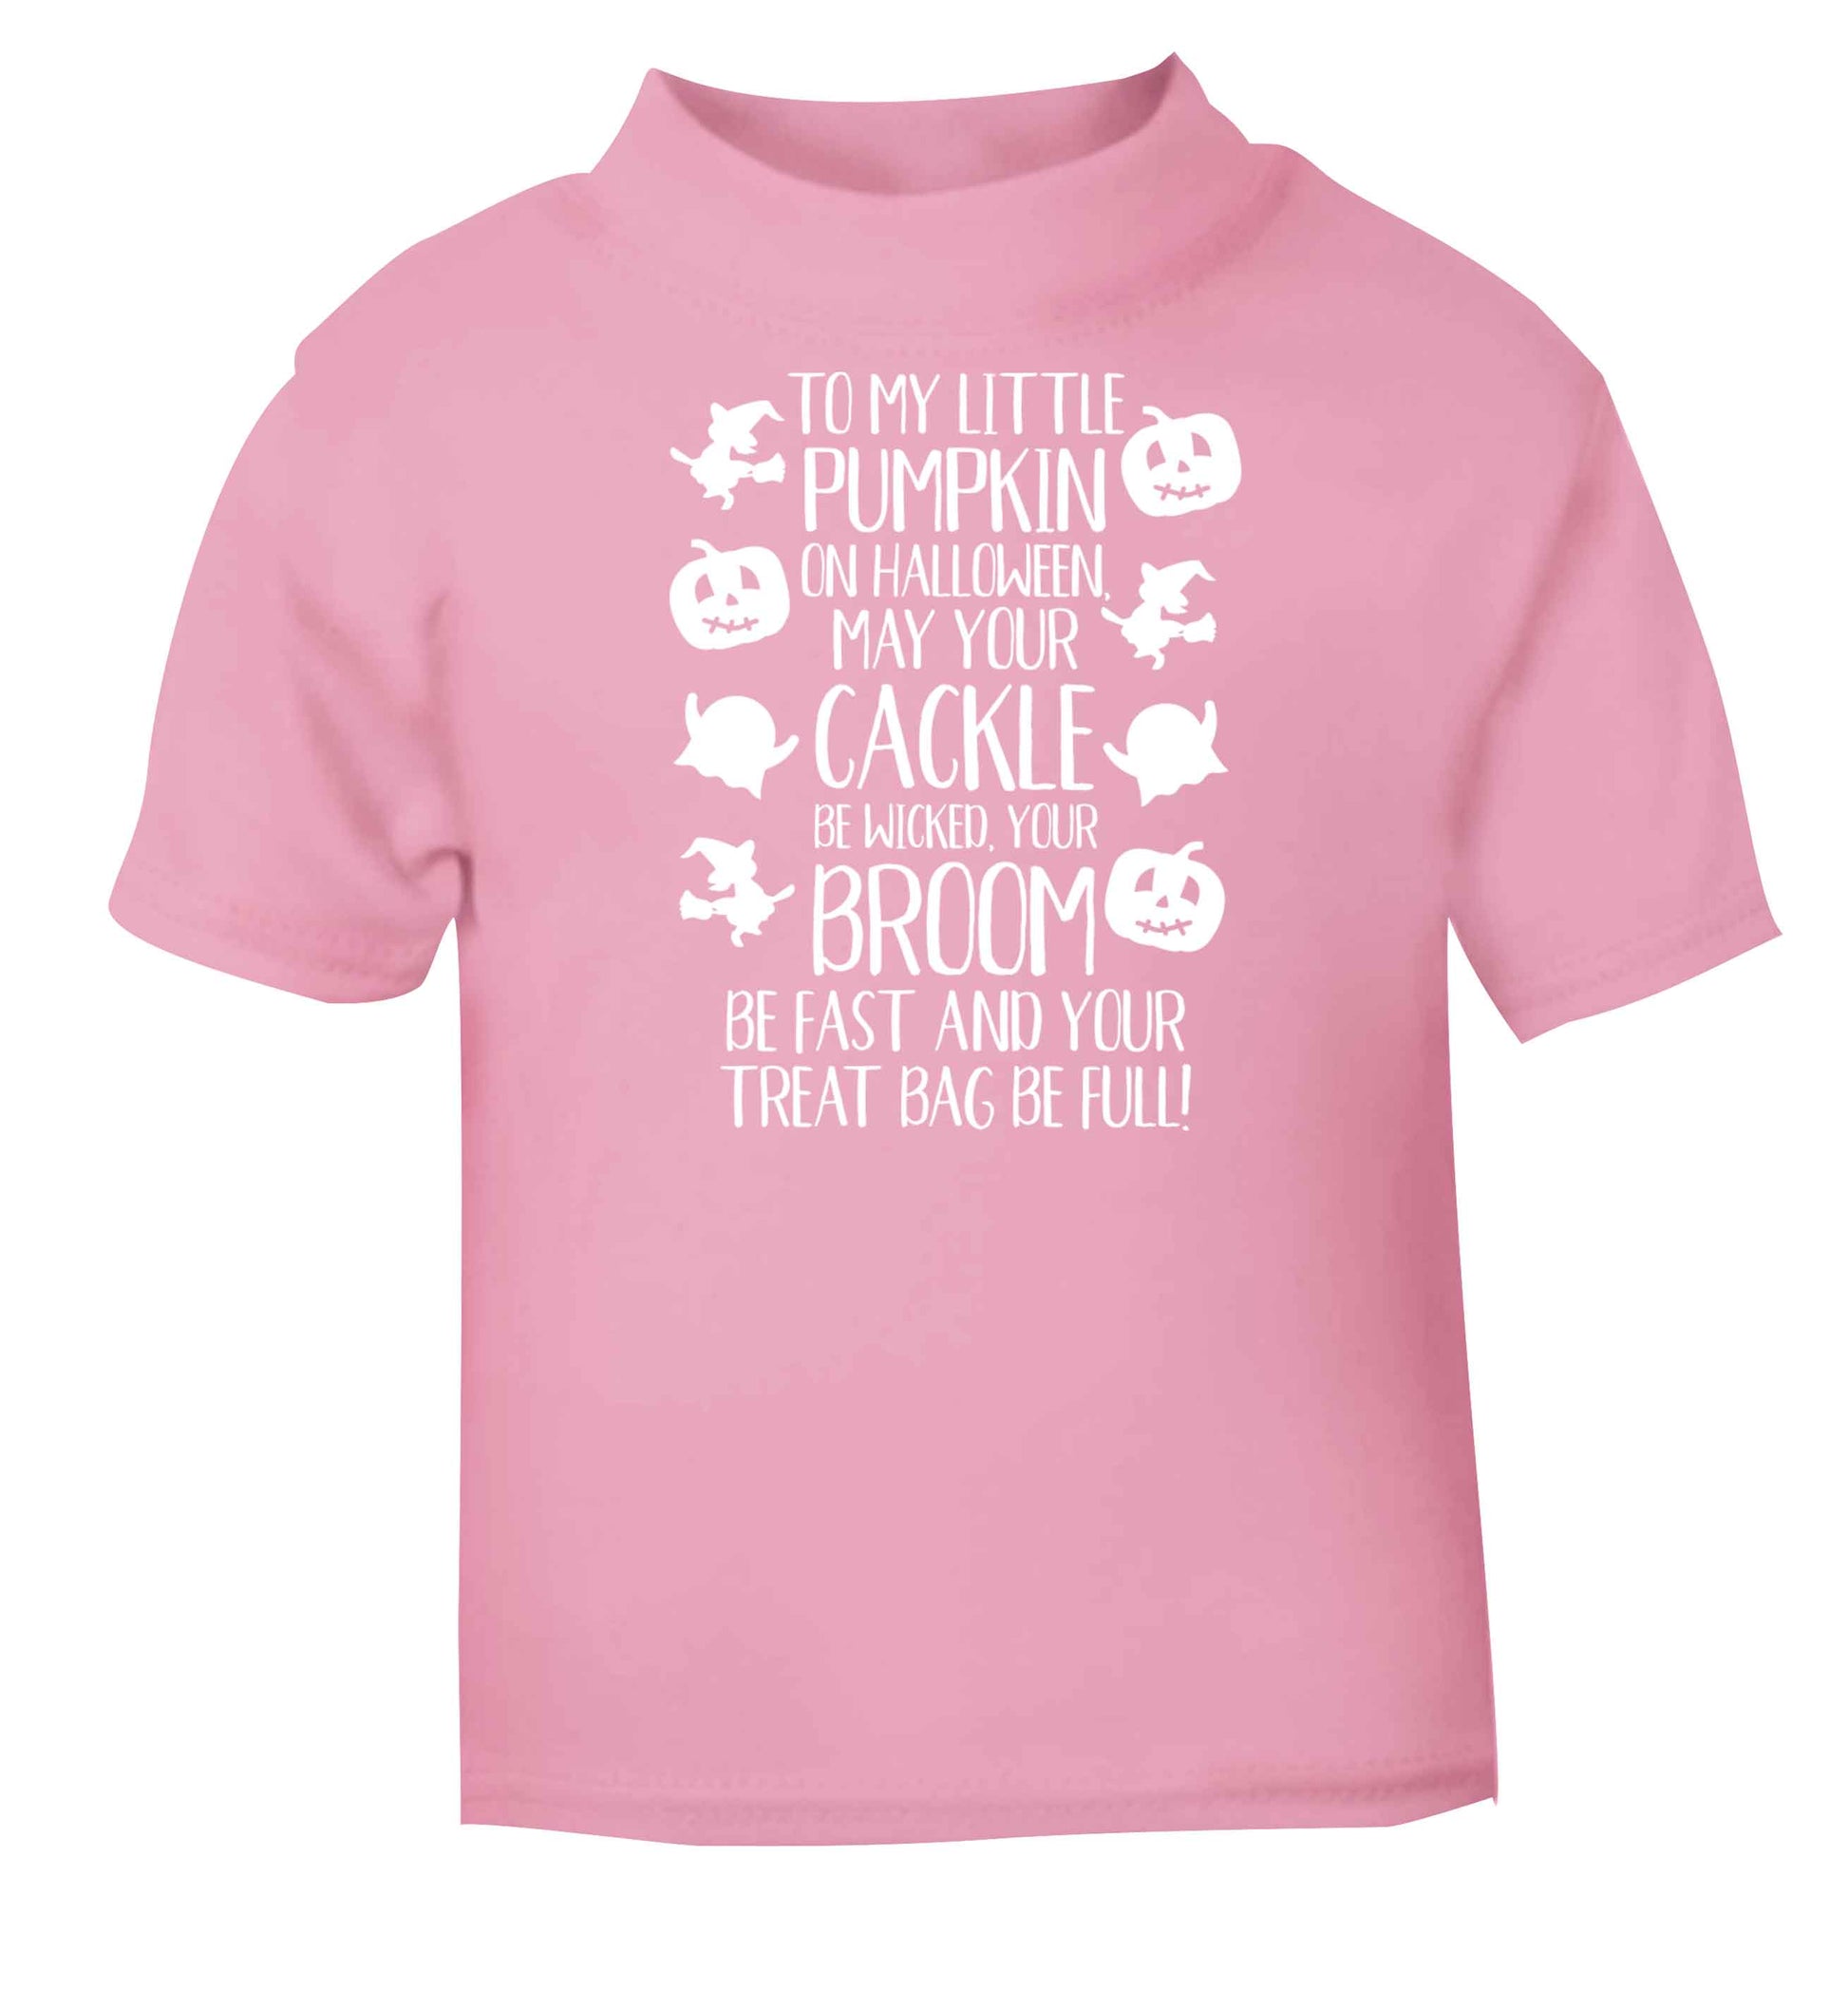 To my Little Pumpkin light pink baby toddler Tshirt 2 Years